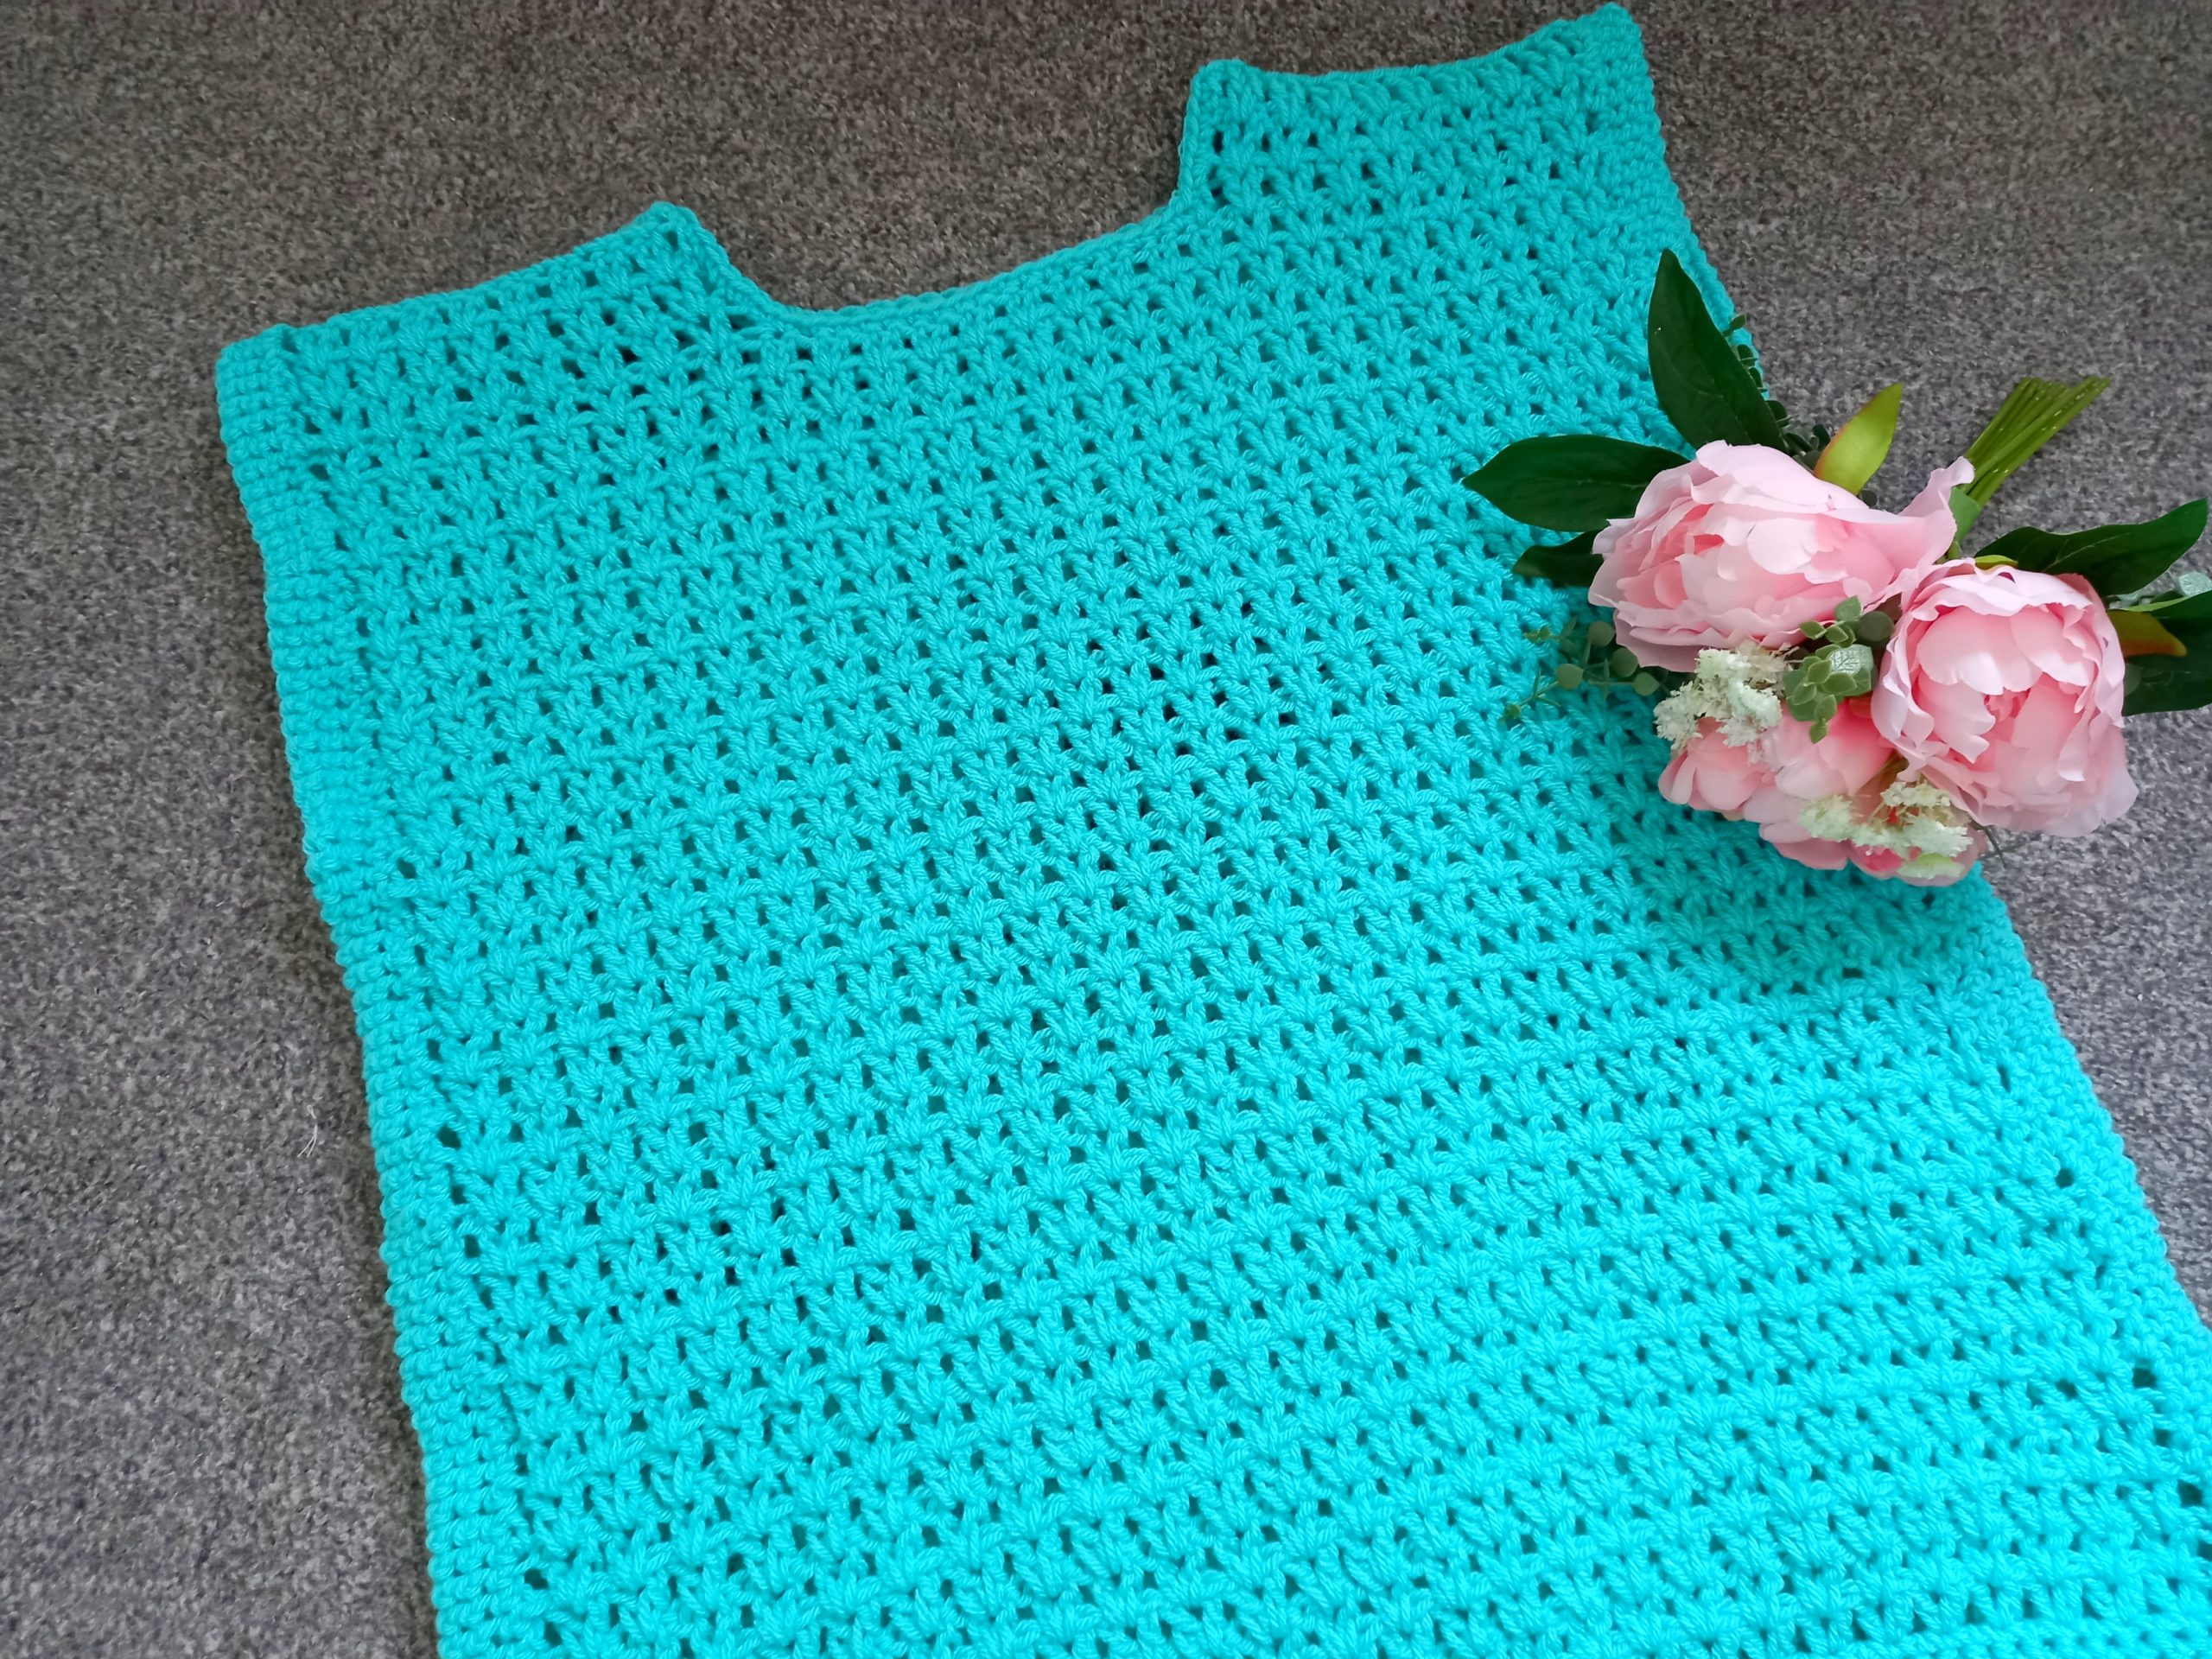 Hi everyone, this week I am bringing to you the crochet Aquamarine Poncho pattern. This very easy crochet project is beautiful and perfect for beginners. Crocheted fast using Lion Brand's Vanna's Choice yarn, it is a very dainty oversized poncho pattern. I hope you enjoy this easy tutorial!